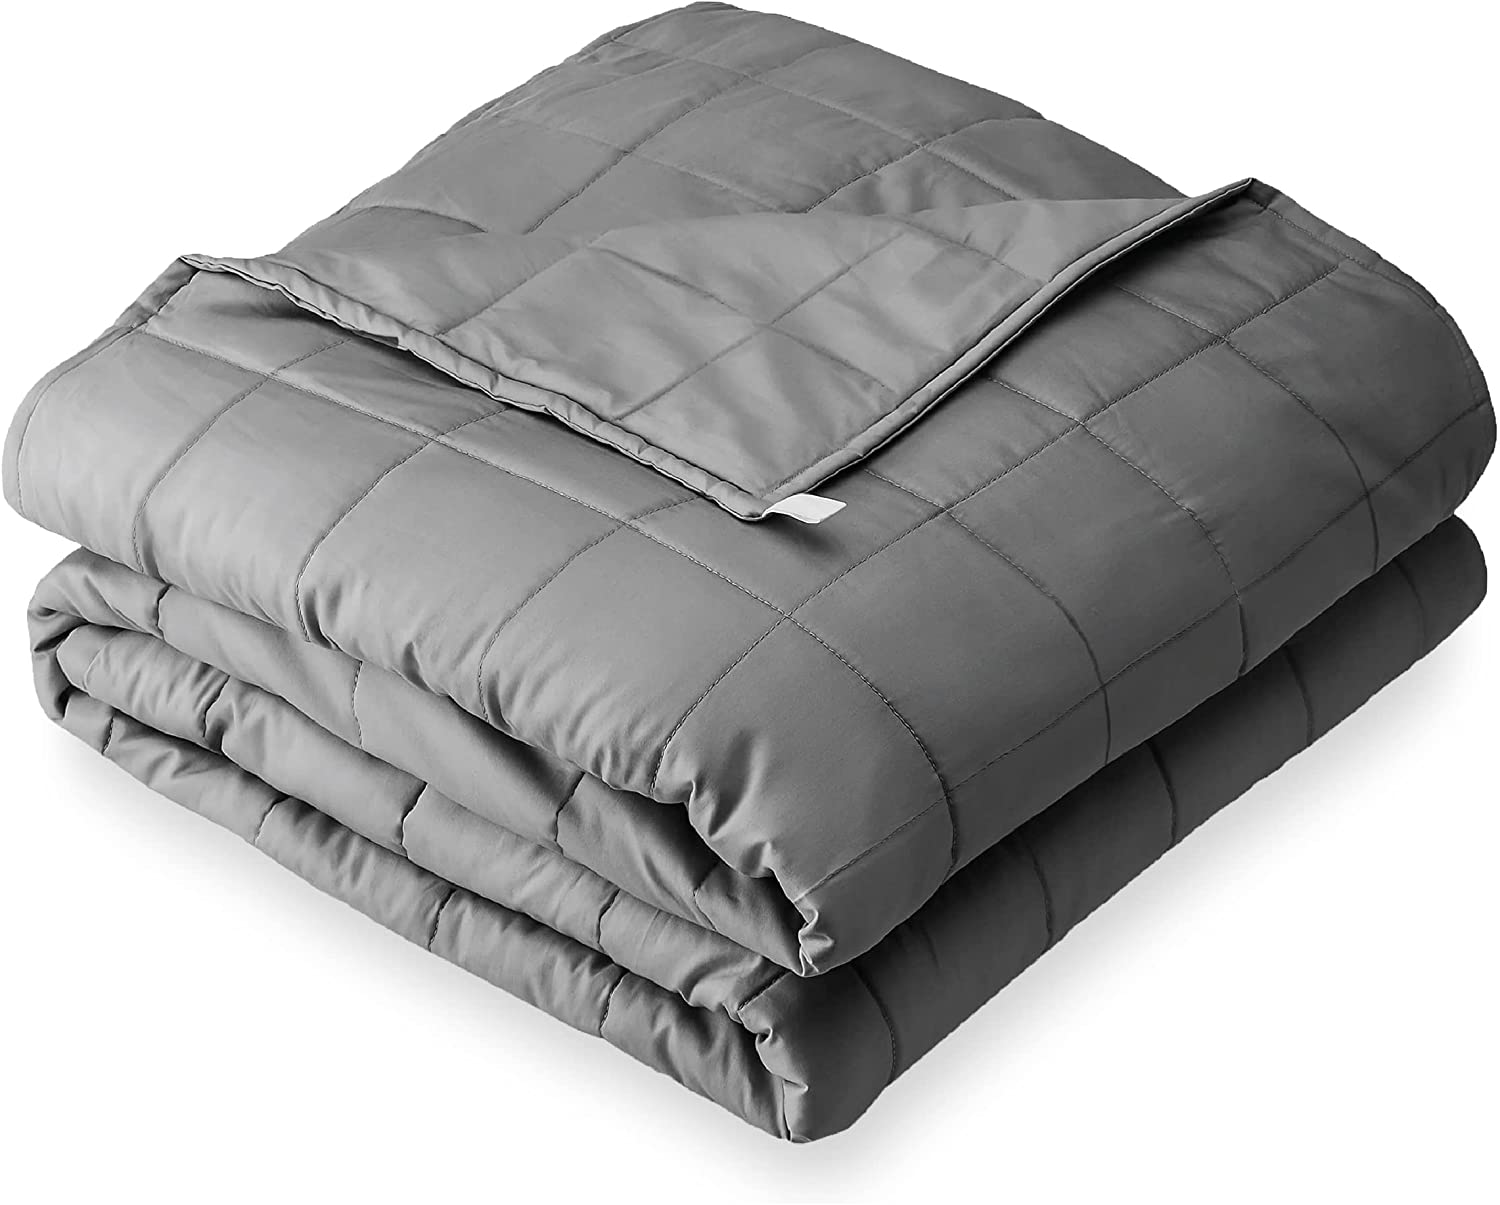 Bare Home Calming Cotton Weighted Blanket For Kids, 7-Pounds